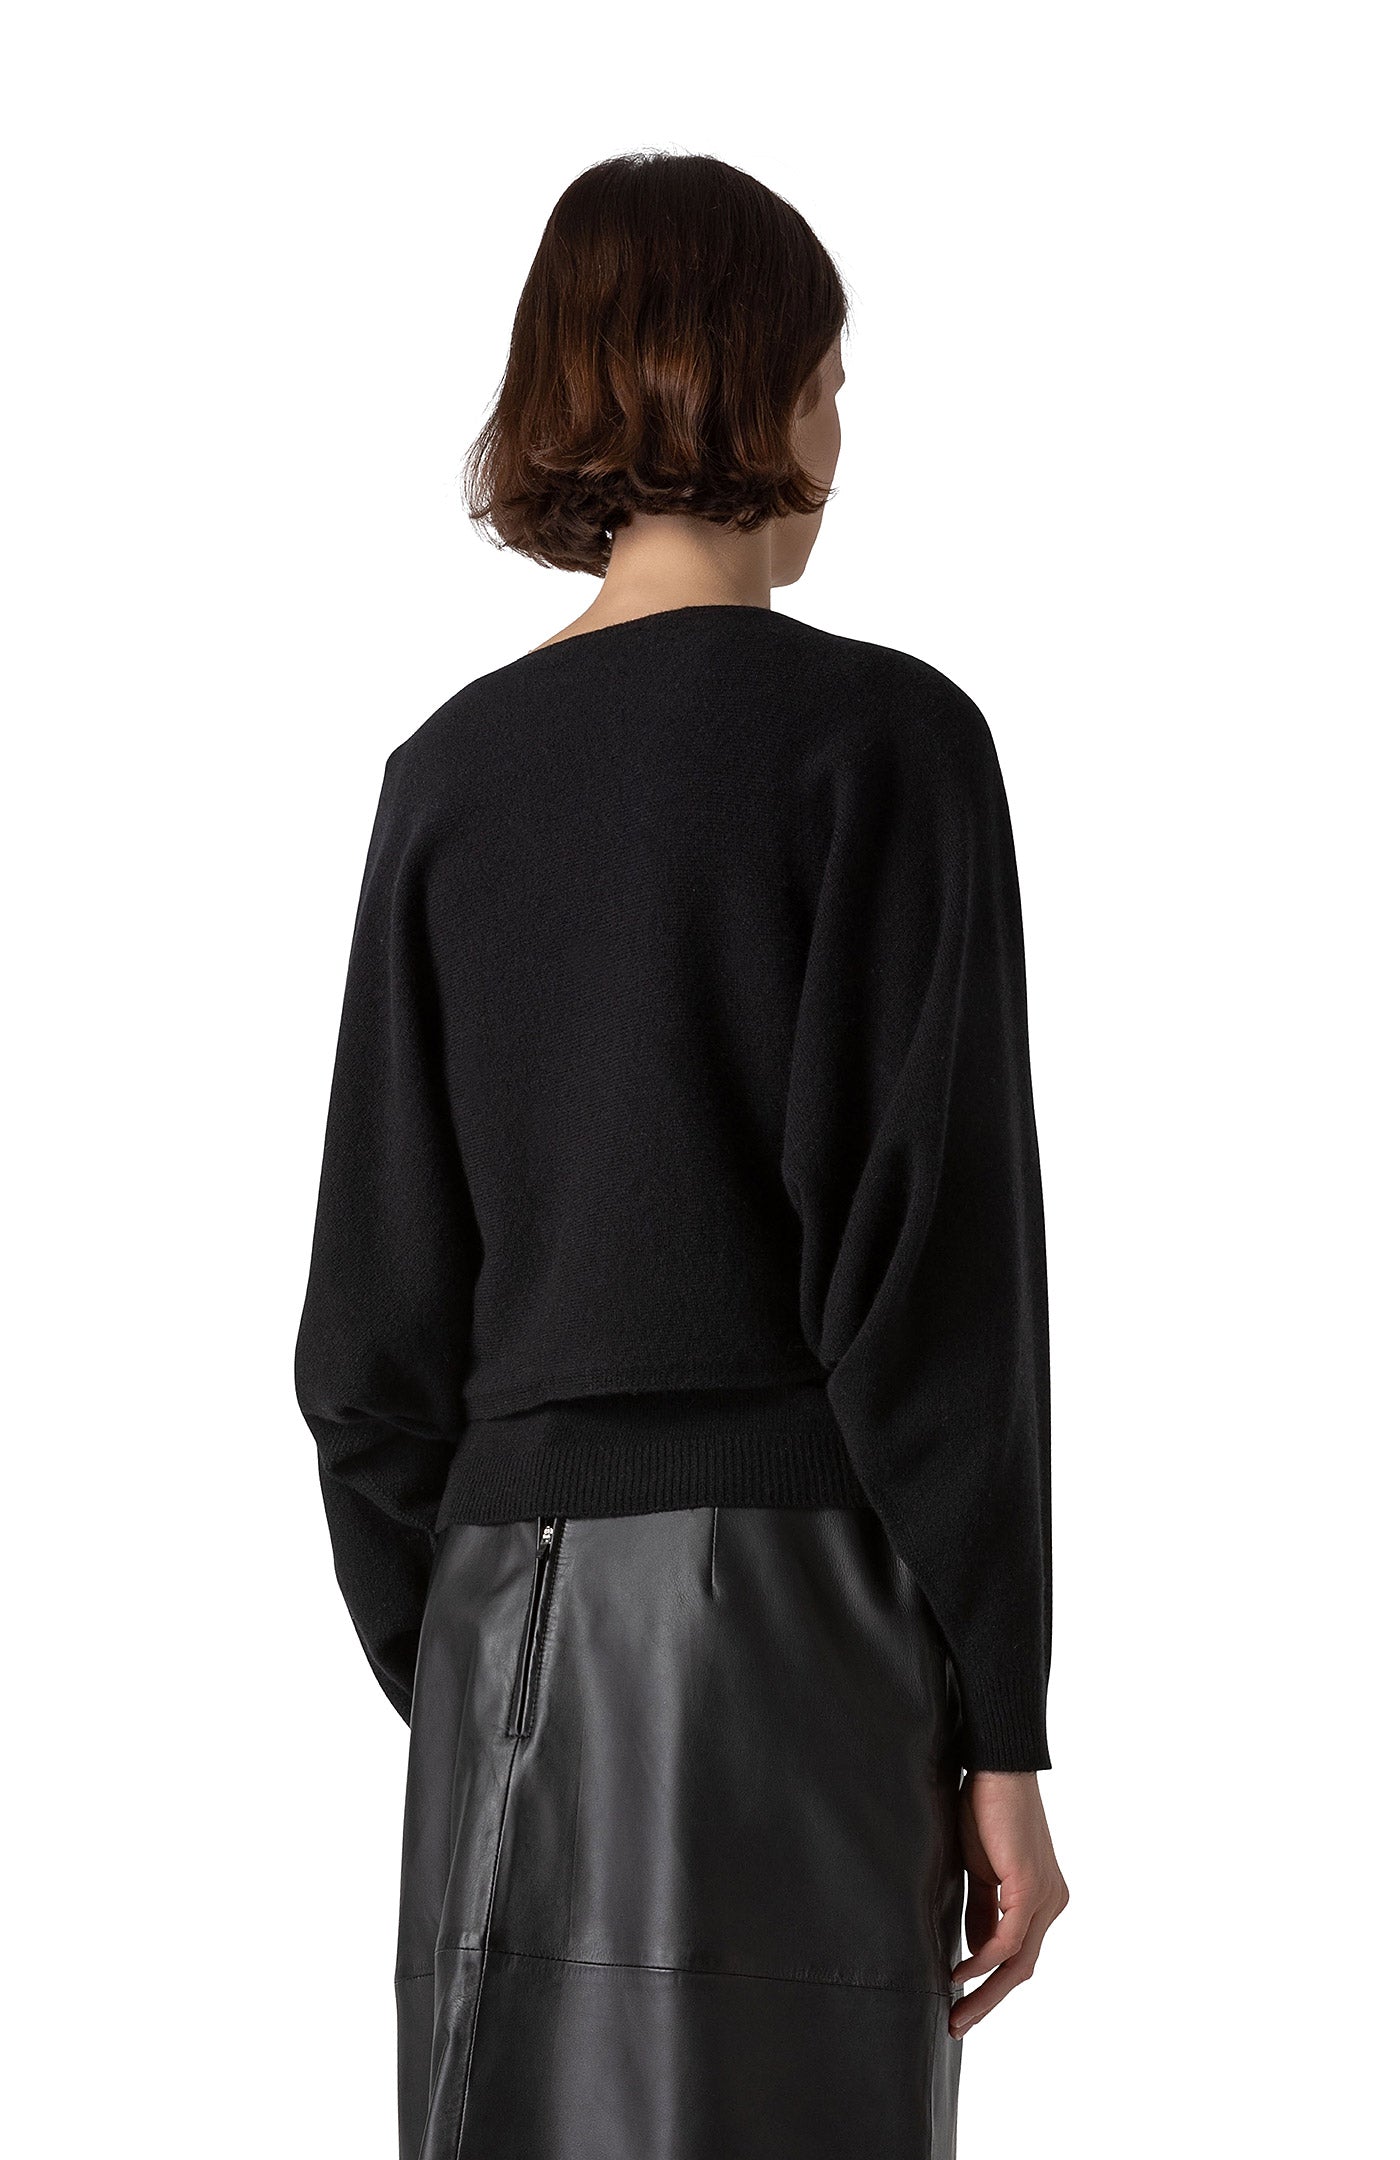 Women's sweater in cashmere blend